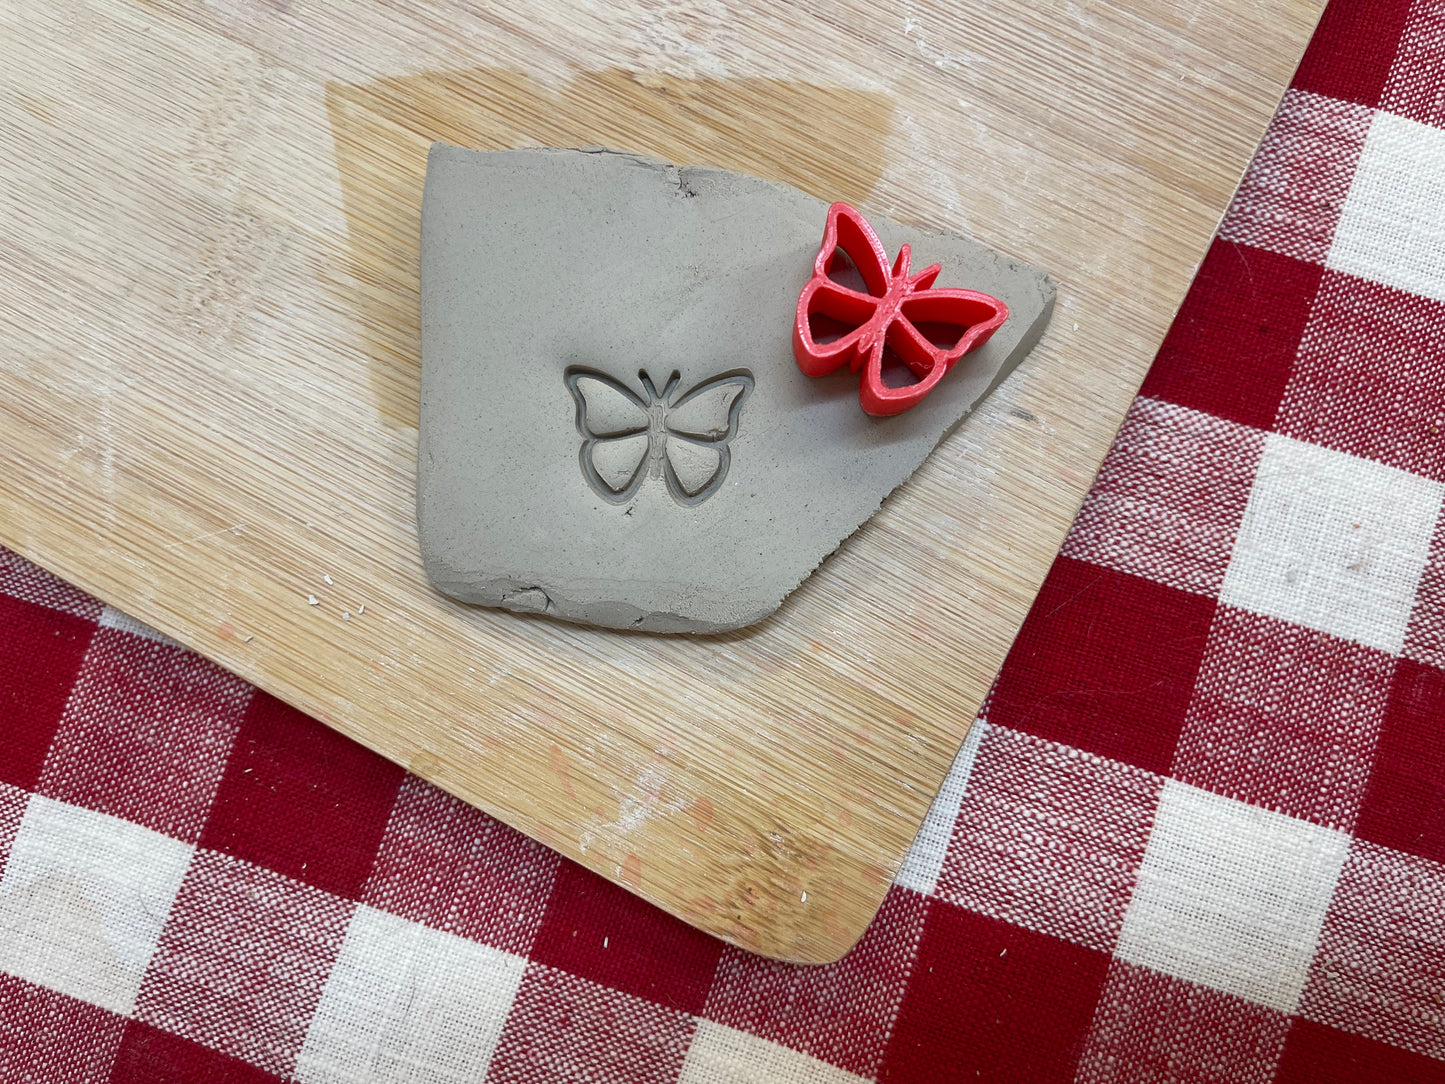 Butterfly Mini Pottery Stamp - June 2022 Stamp of the Month, plastic 3D printed, multiple sizes